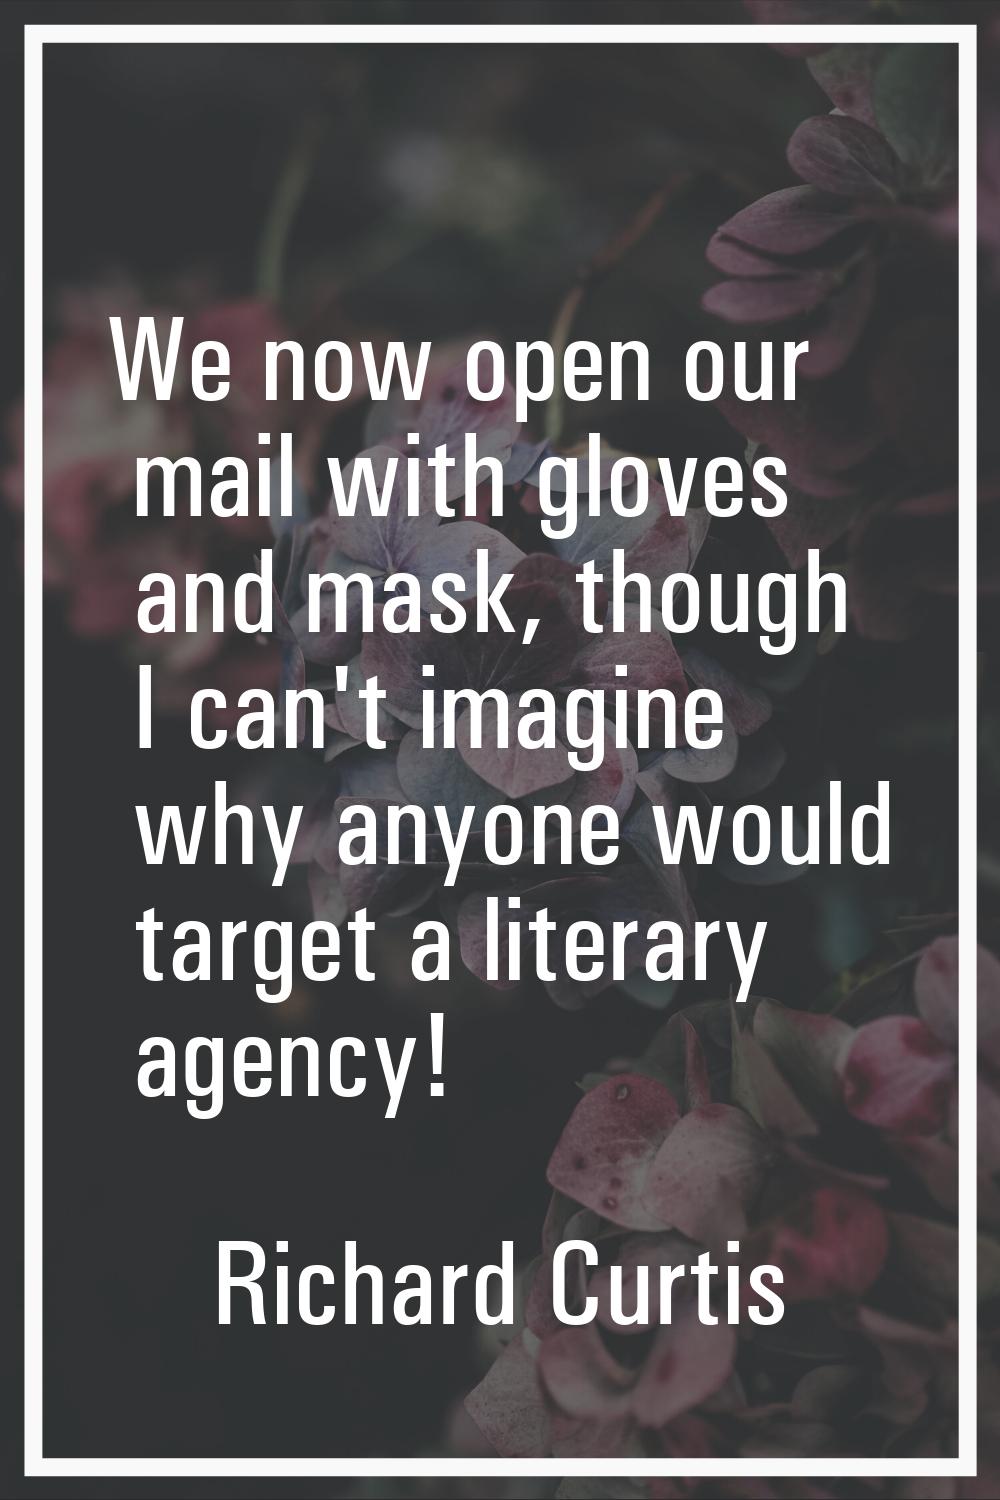 We now open our mail with gloves and mask, though I can't imagine why anyone would target a literar